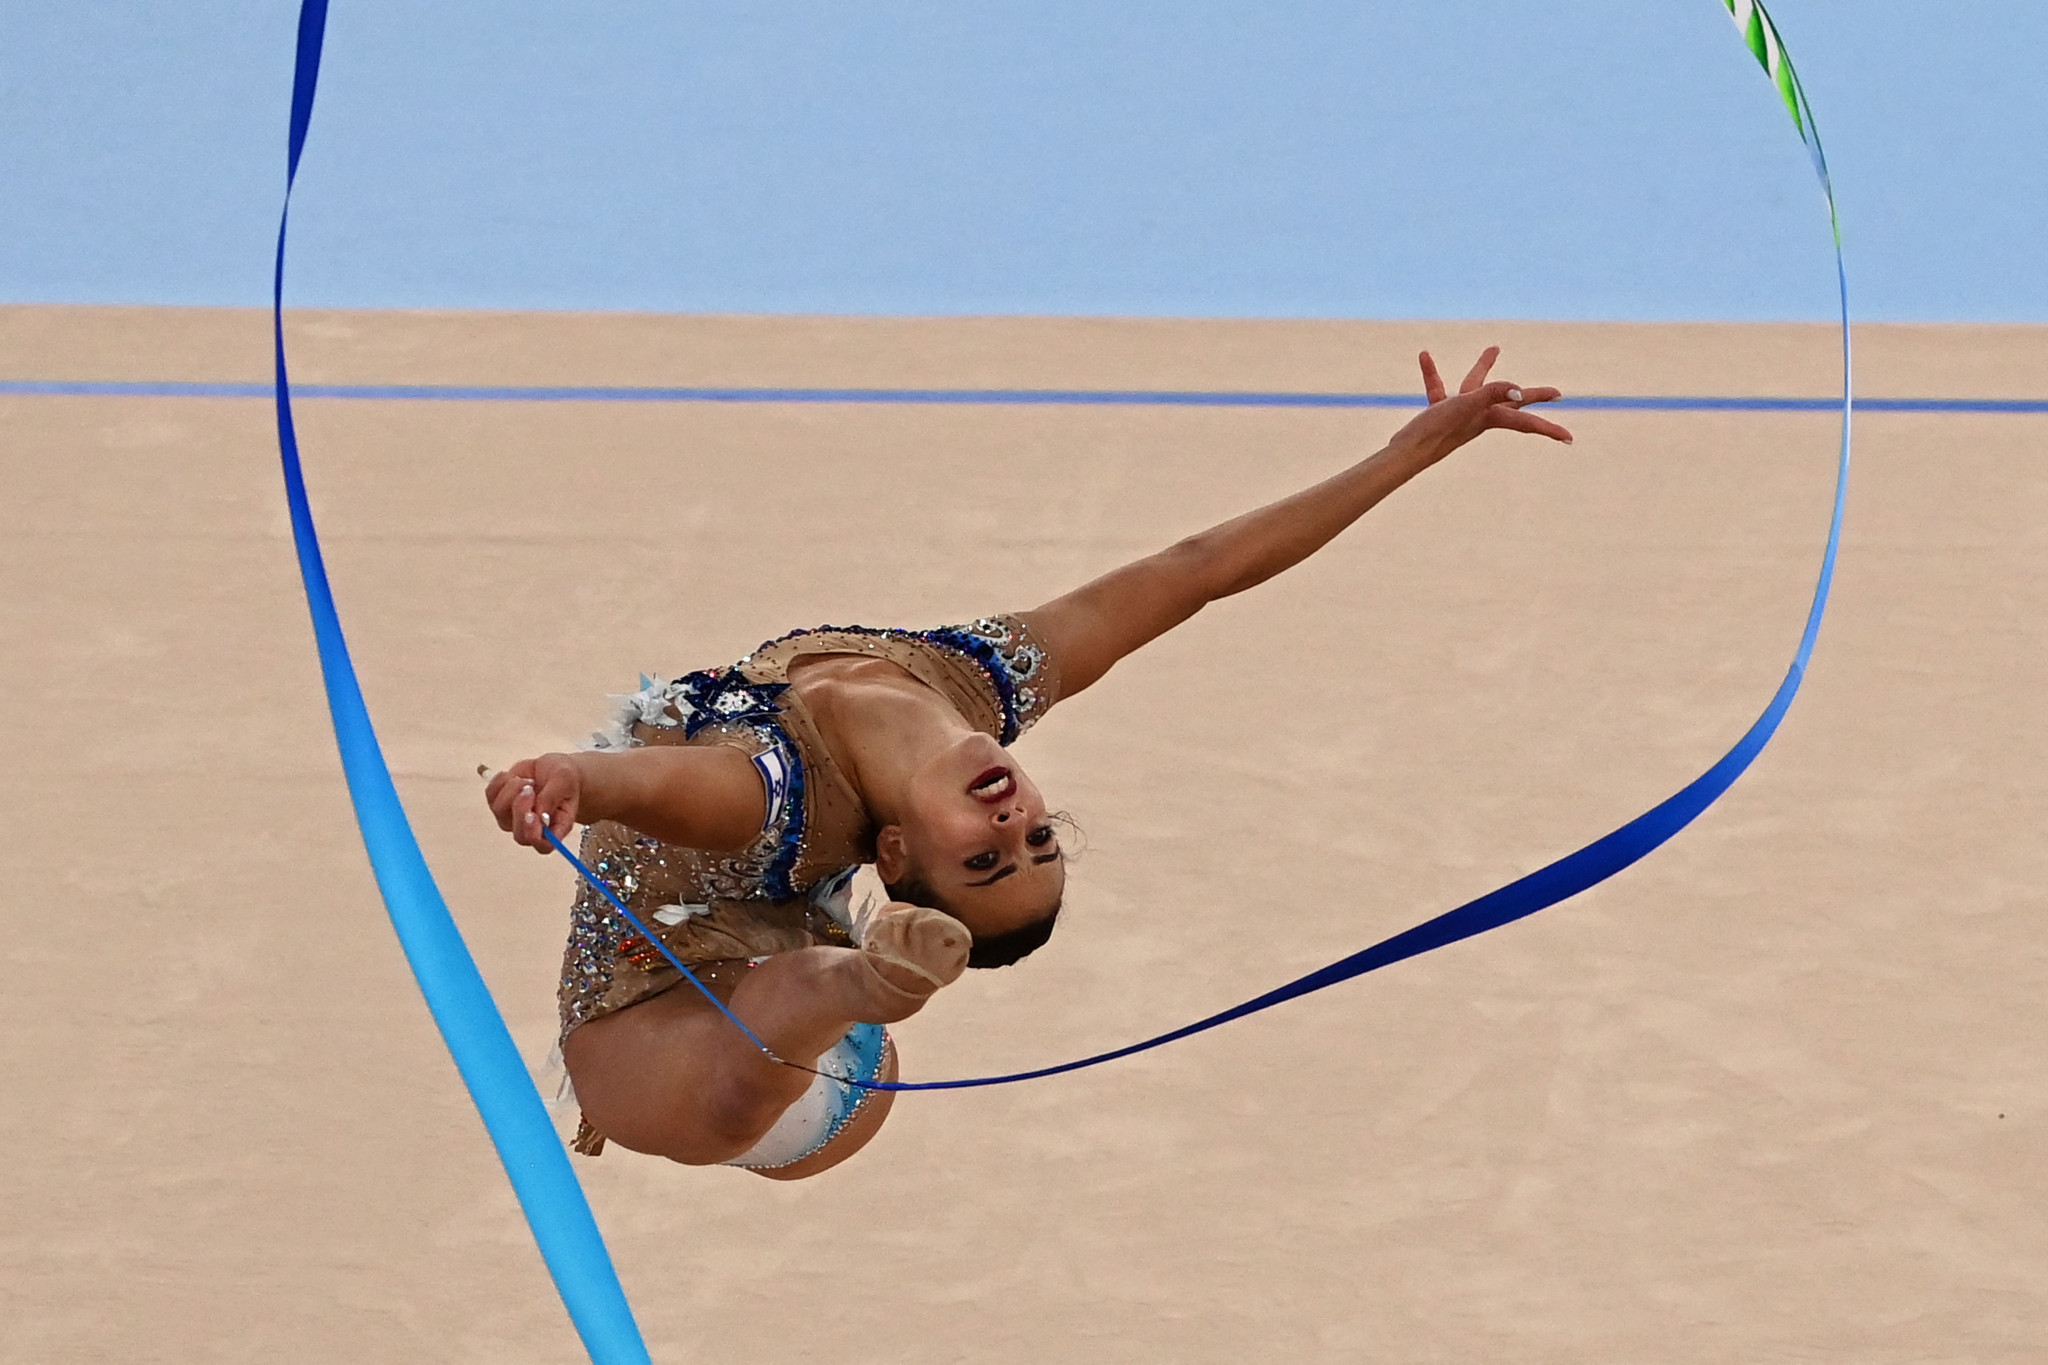 Irina Viner was critical of judging at the rhythmic gymnastics during Tokyo 2020 where Israel's Linoy Ashram beat Dina Averina to ensure Russia did not win an Olympic gold medal in the sport for the first time in quarter-of-a-century ©Getty Images